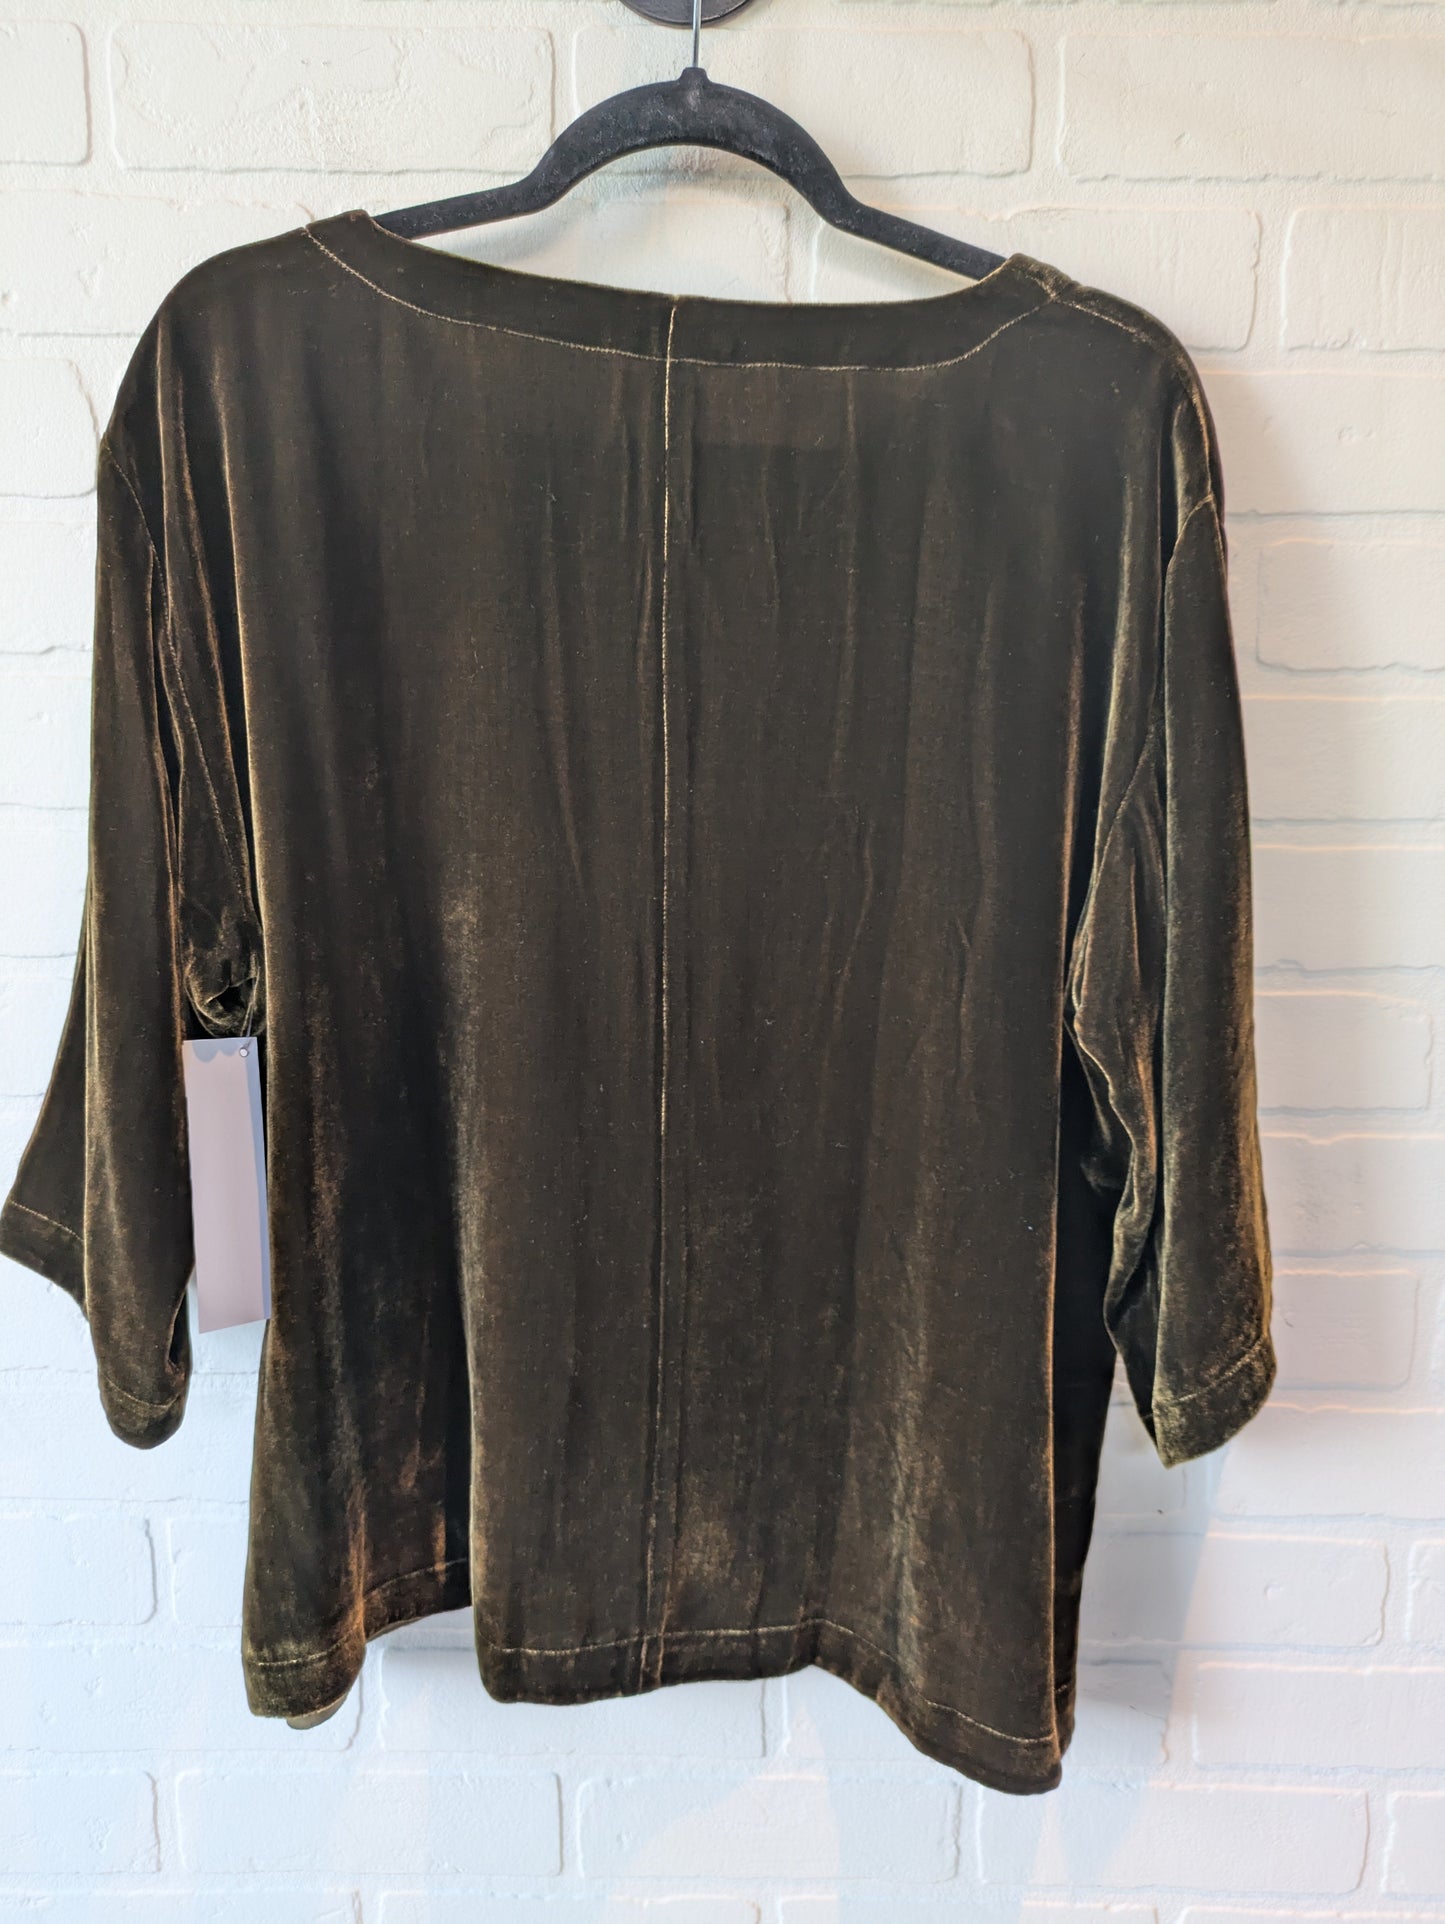 Green Top Long Sleeve Eileen Fisher, Size S